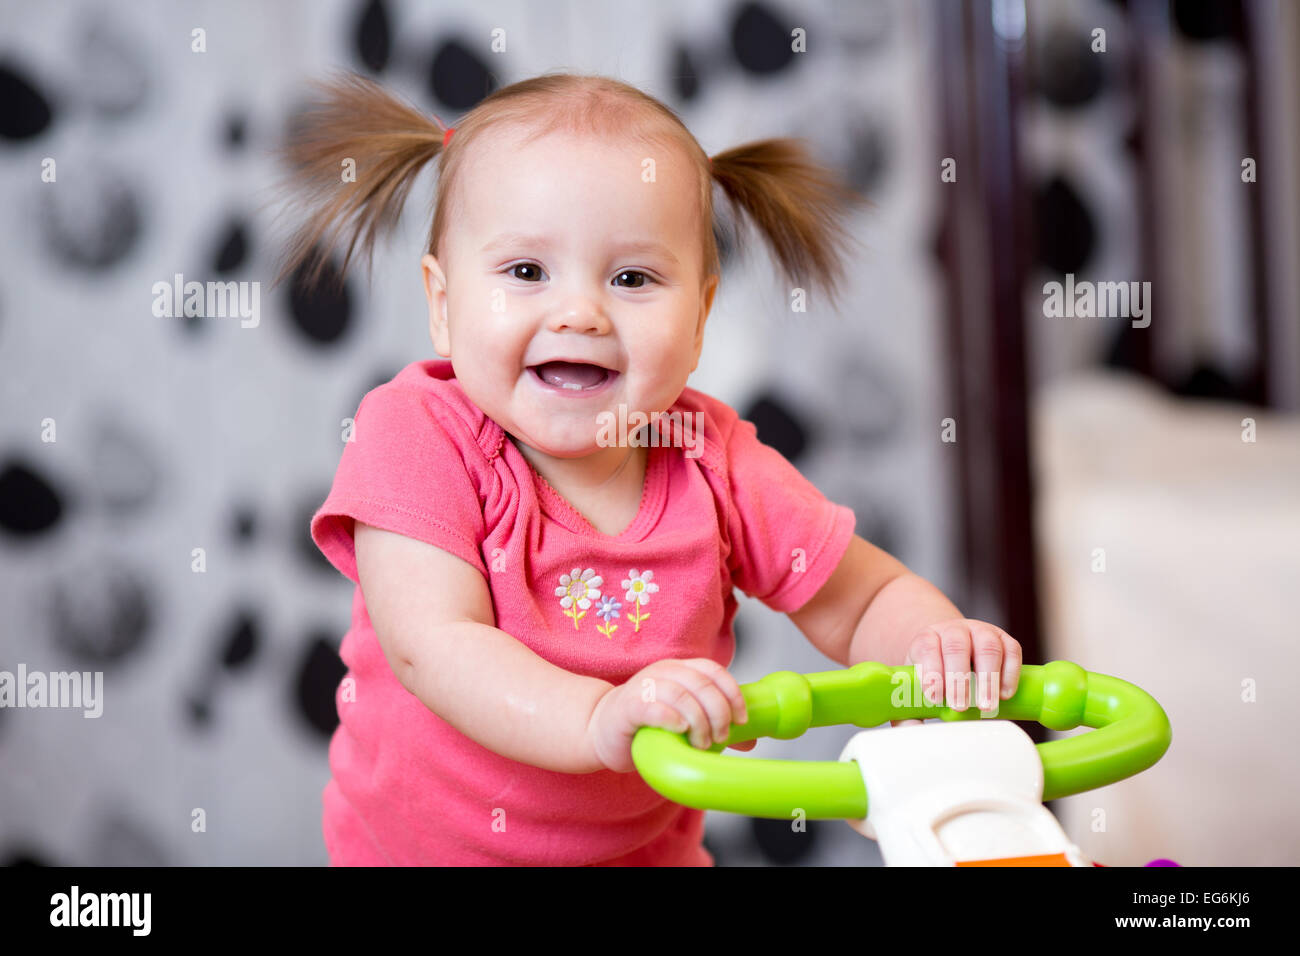 Cute baby learning to walk Stock Photo